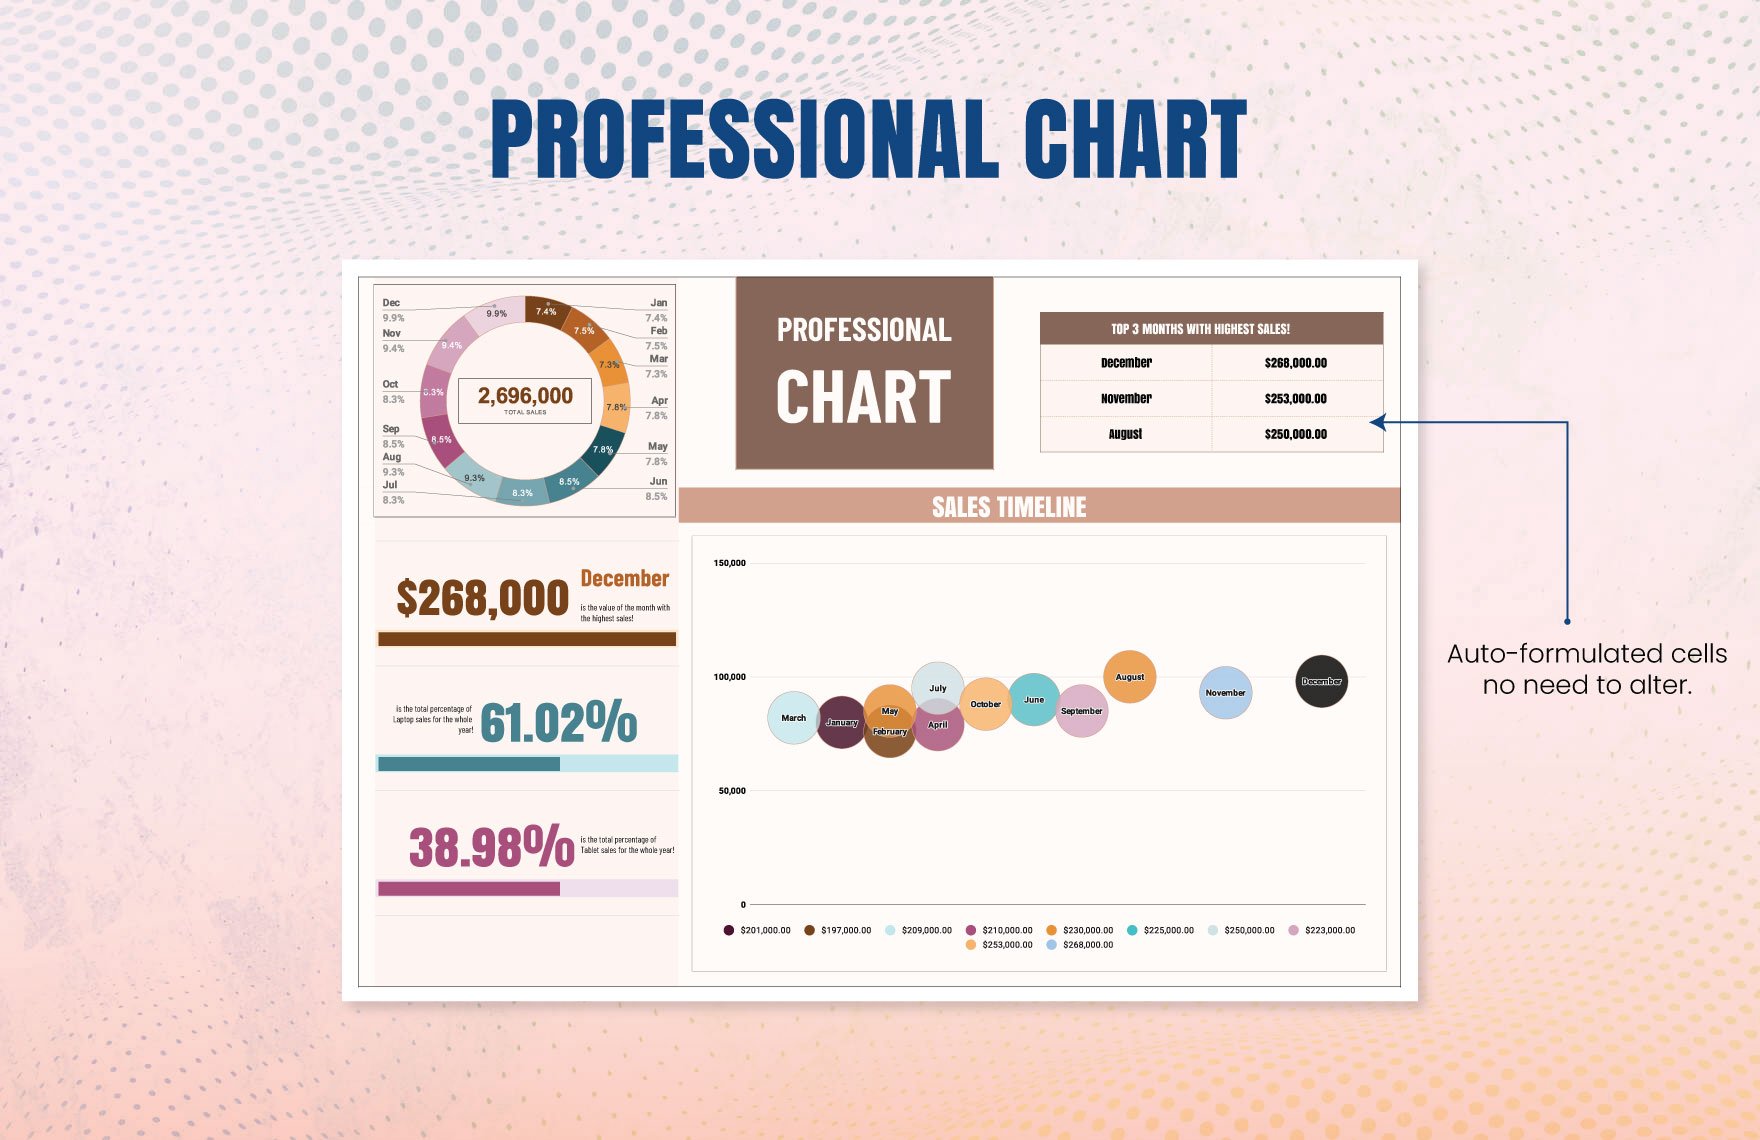 Professional Chart Template